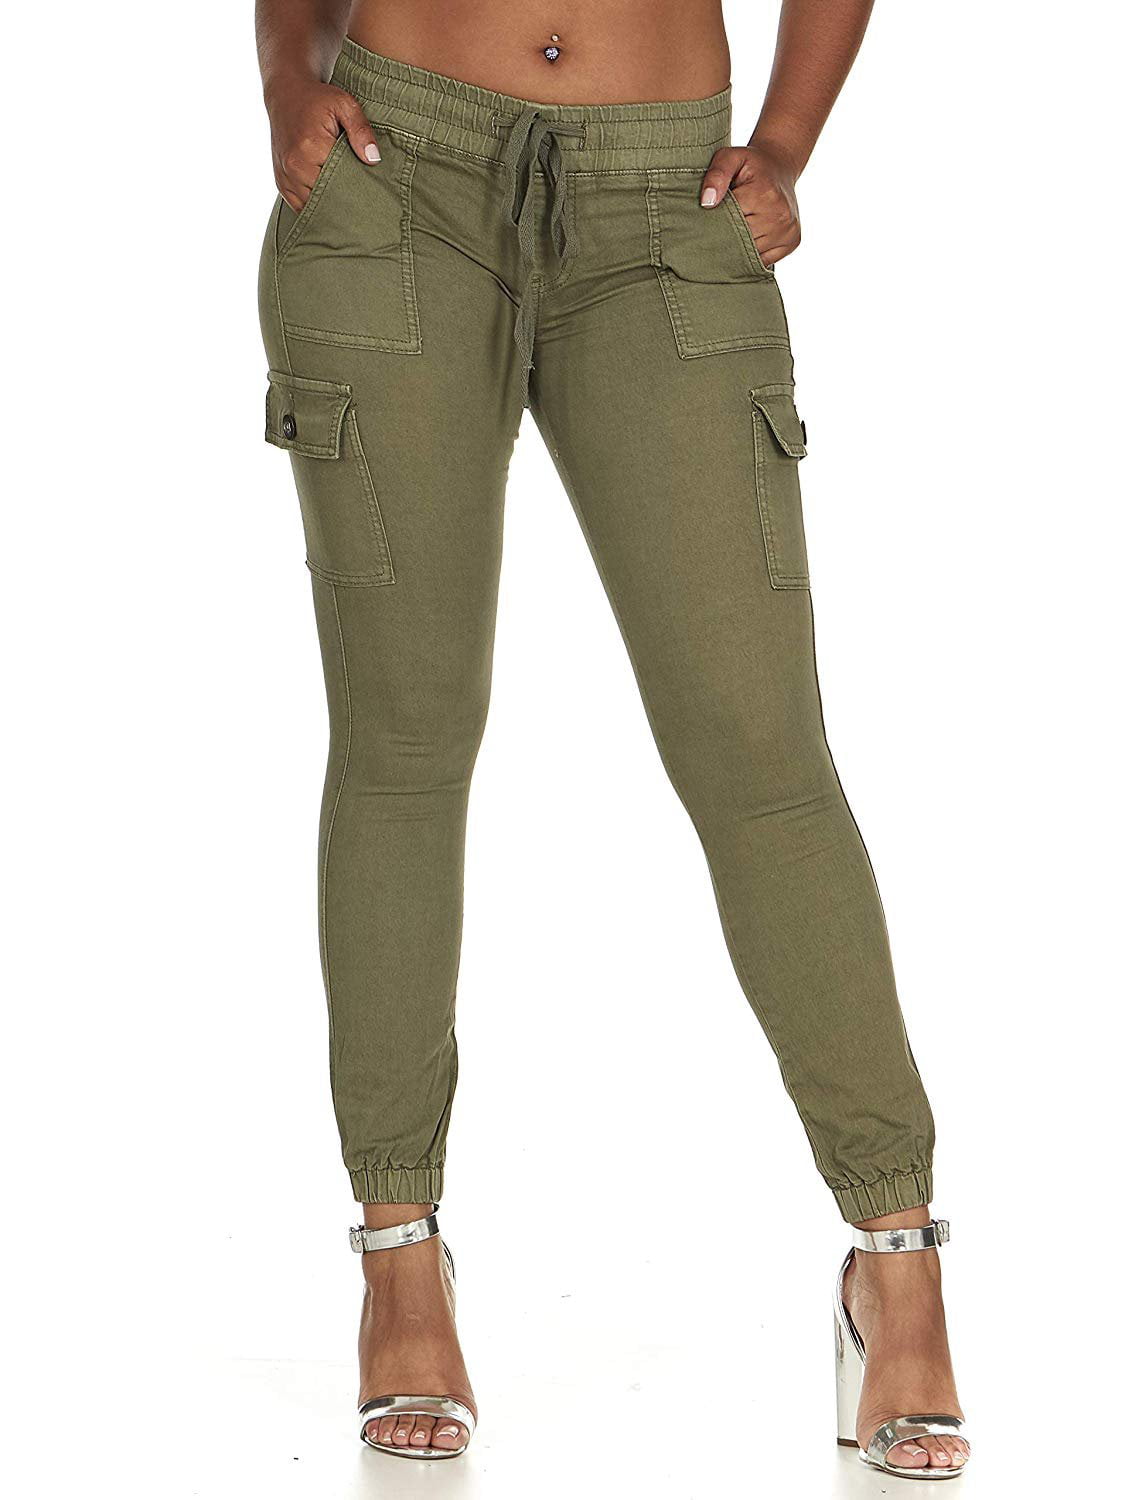 VIP Jeans - V.I.P. JEANS CG Collection Cargo High Waisted Jogger Skinny ...